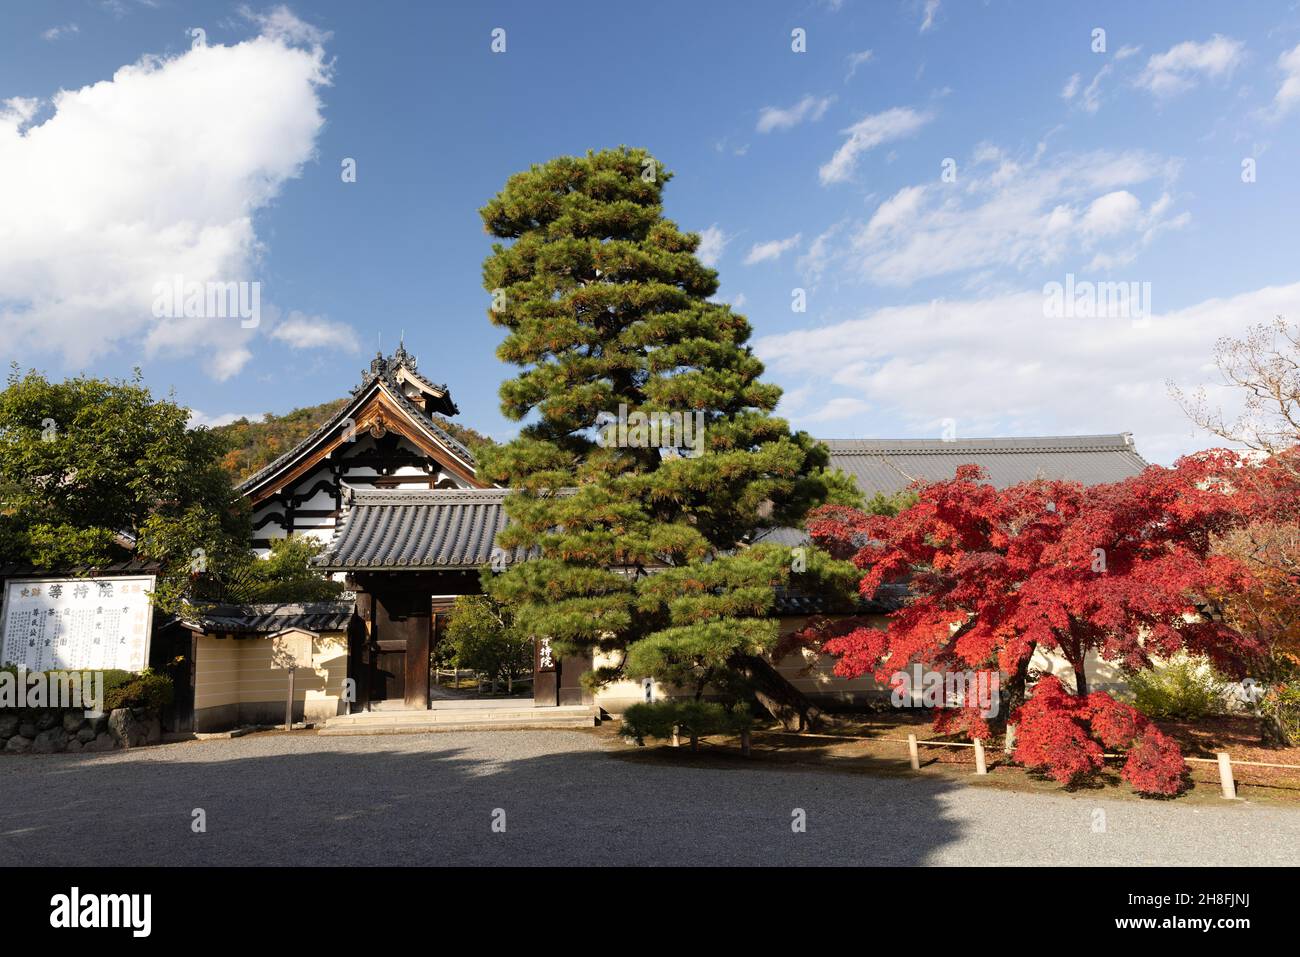 Kyoto, Japan. 26th Nov, 2021. Entrance of Toji-in Temple.Toji-in was established in 1341 on the southern slope of Mount Kinugasa by the shogun Ashikaga Takauji. 15 shoguns came from the Ashikaga clan making the Toji-in temple rich in historical artifacts and artworks. Credit: SOPA Images Limited/Alamy Live News Stock Photo